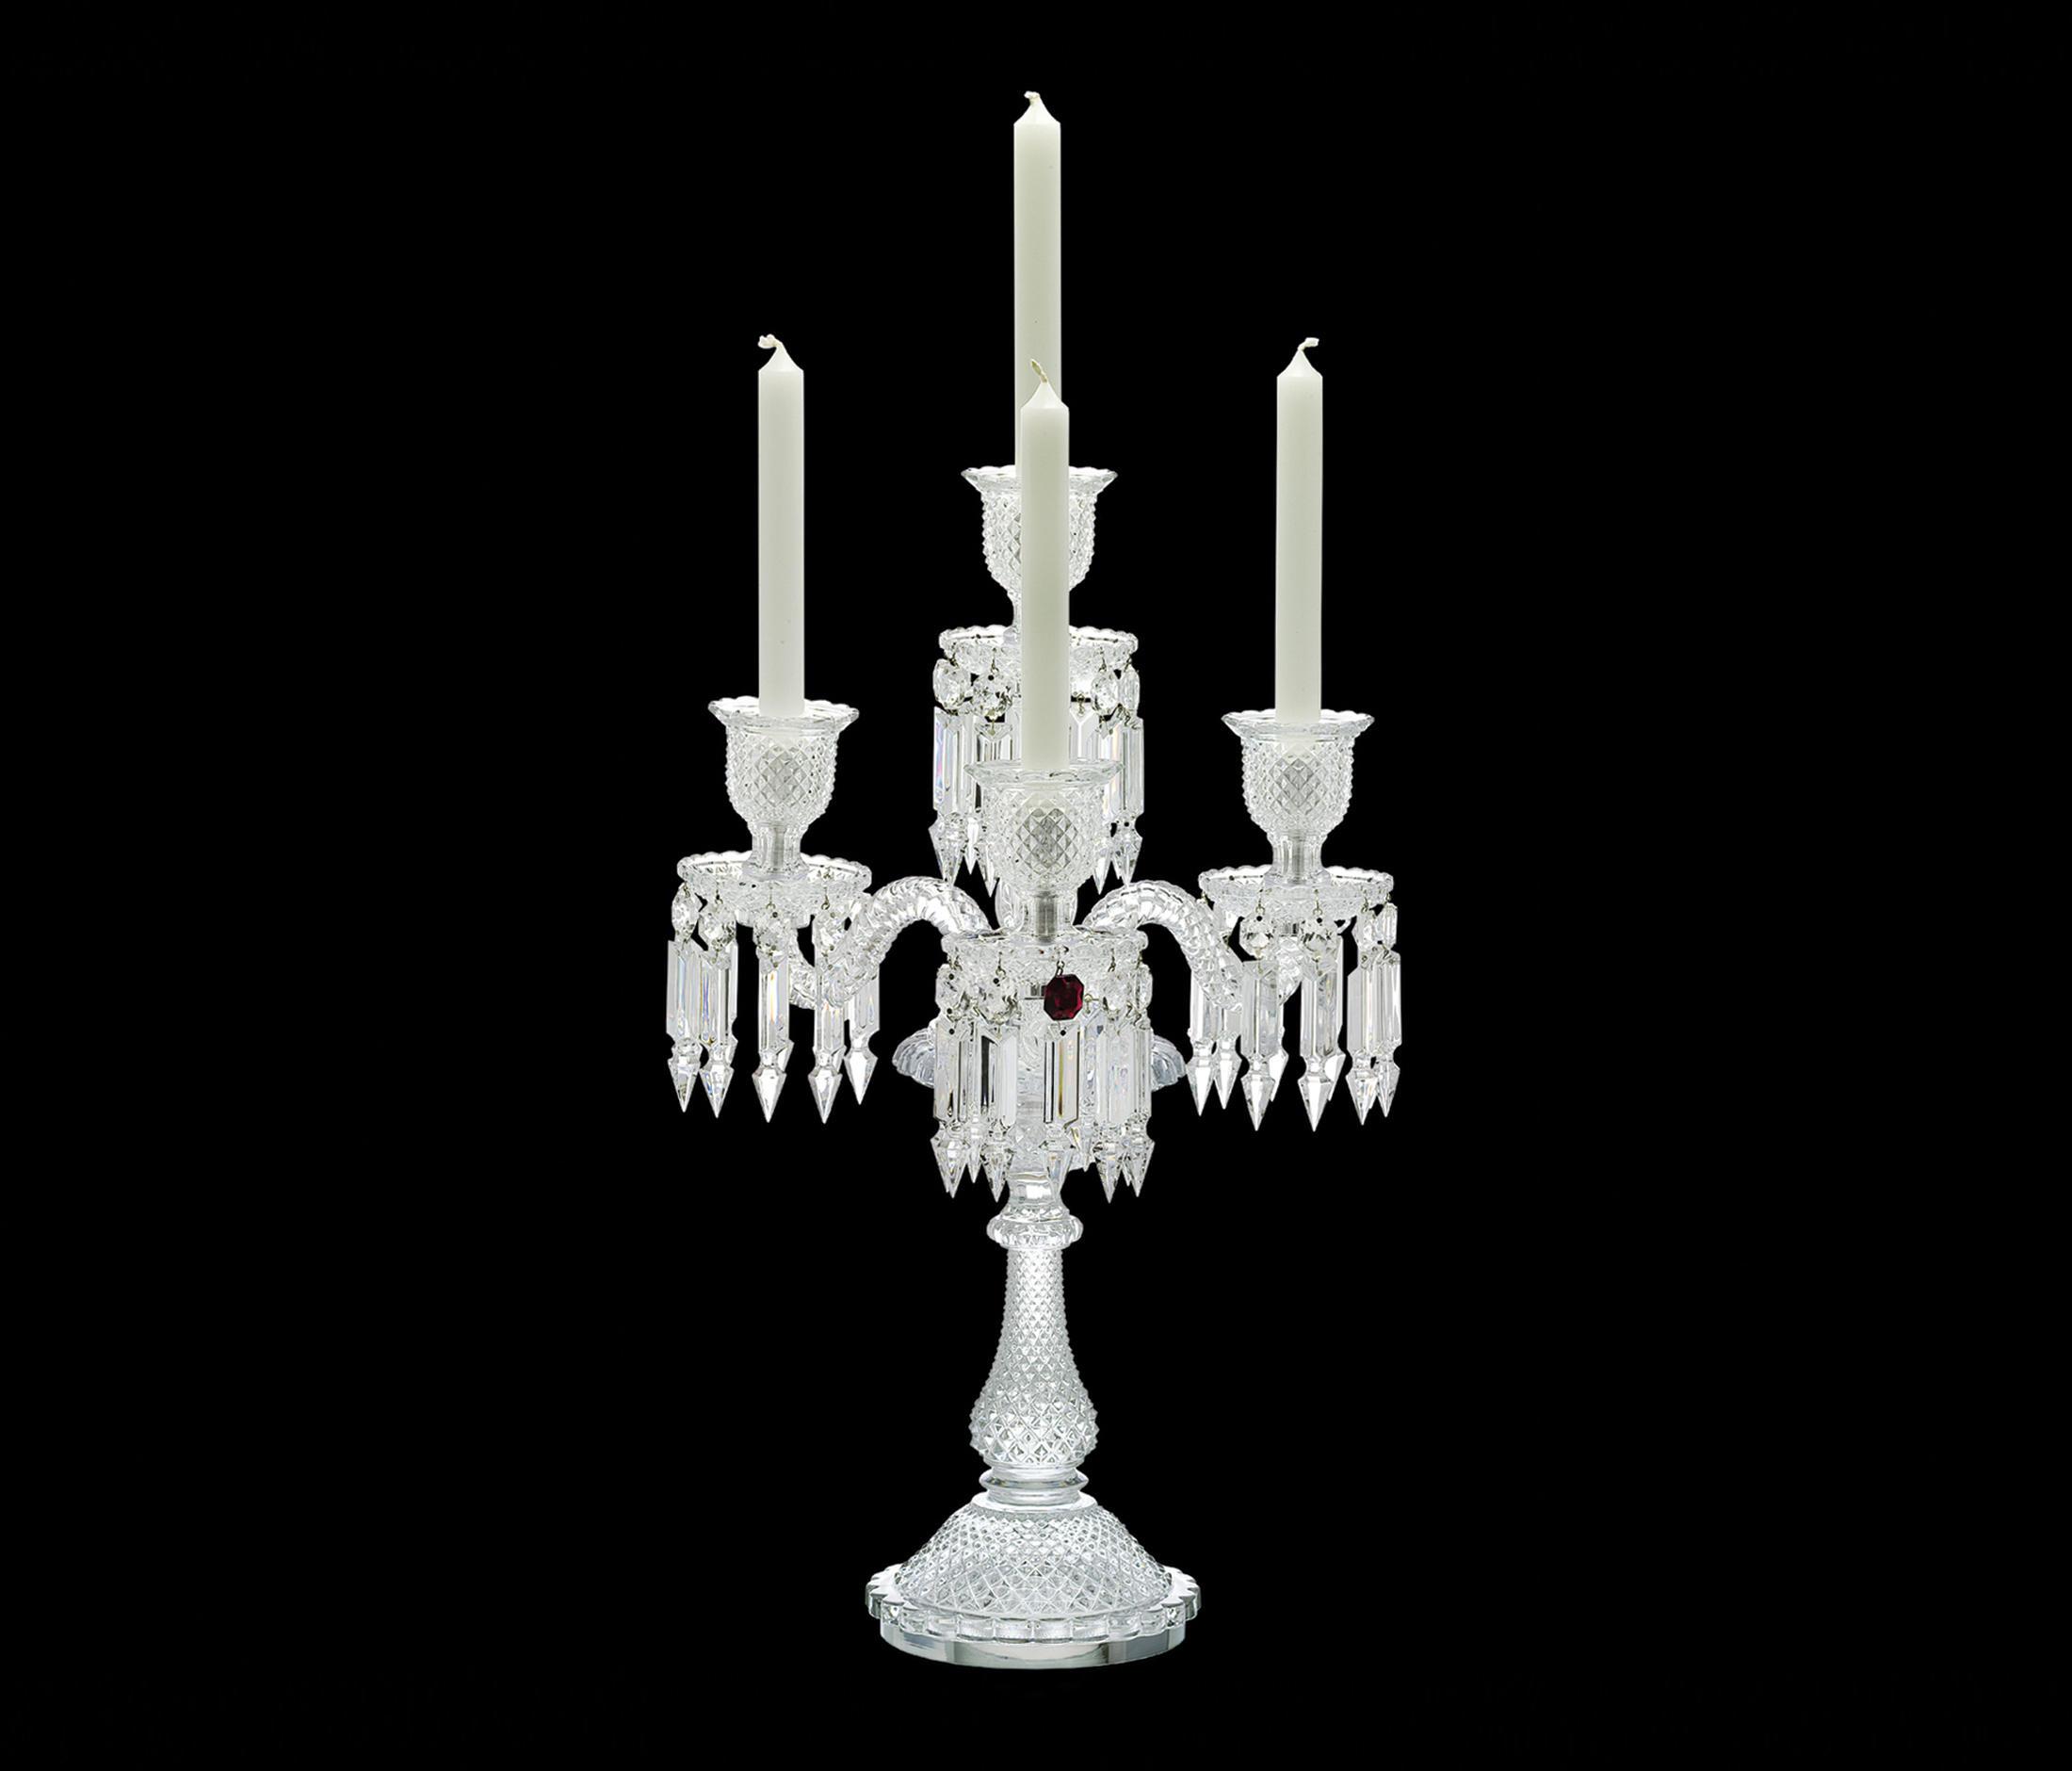 lighting,symbolizes,perfection,almost,centuries,baccarat,house,electrificat...